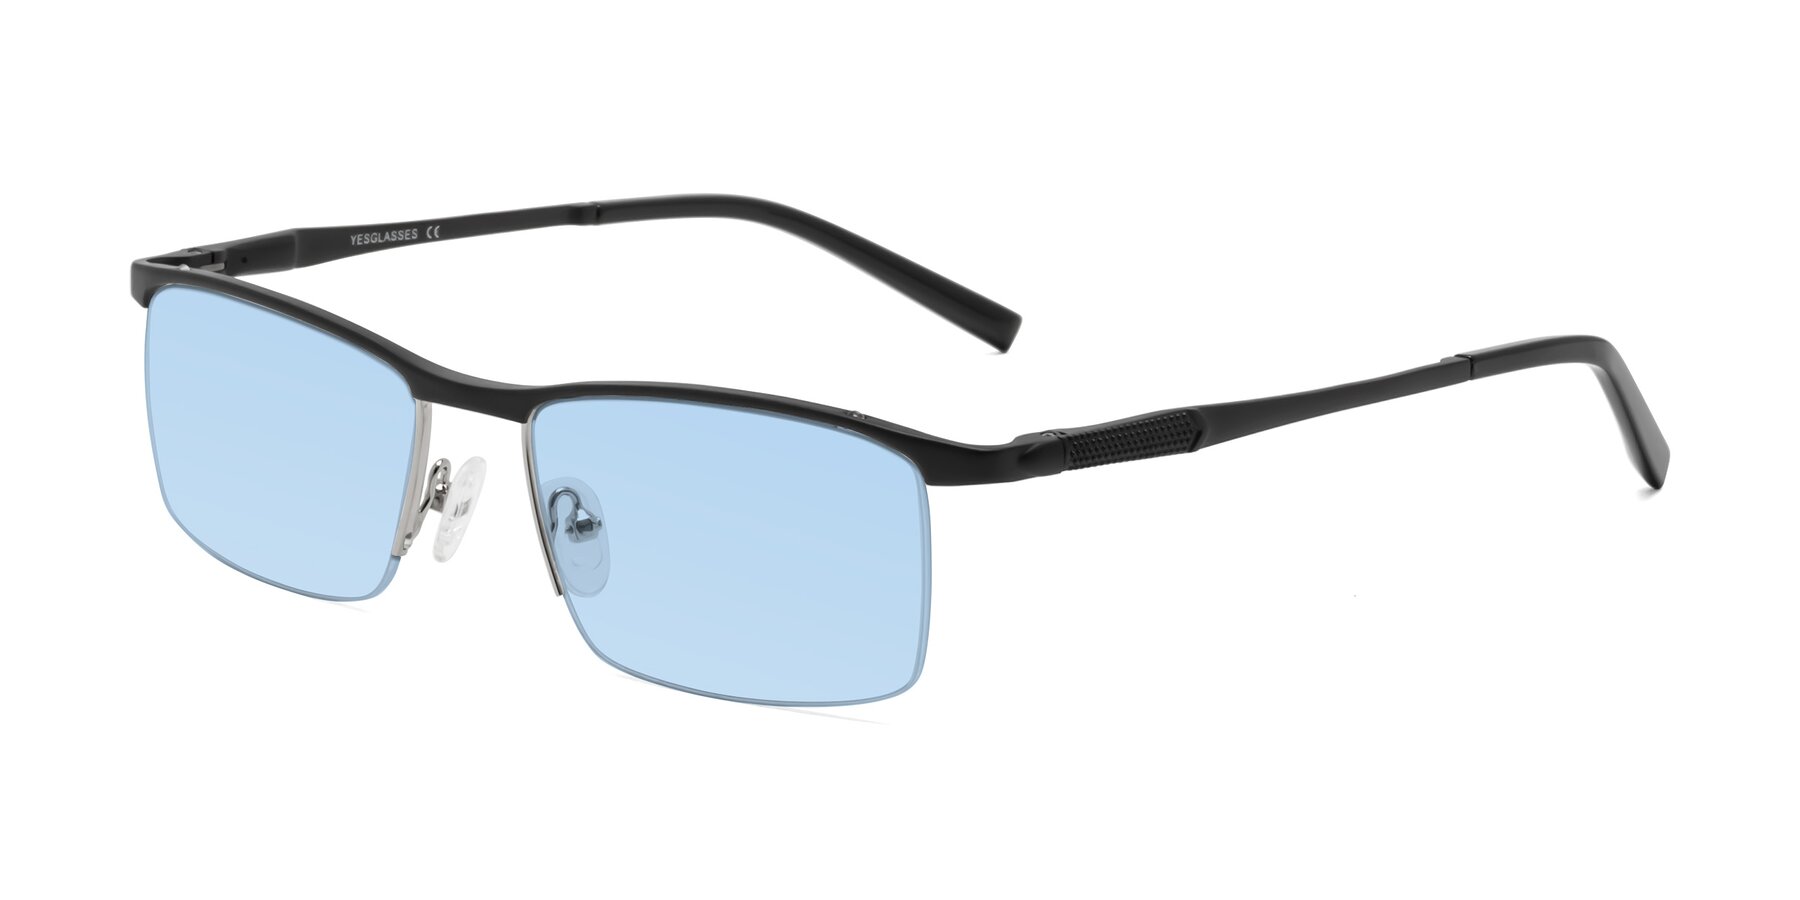 Angle of CX6303 in Black with Light Blue Tinted Lenses